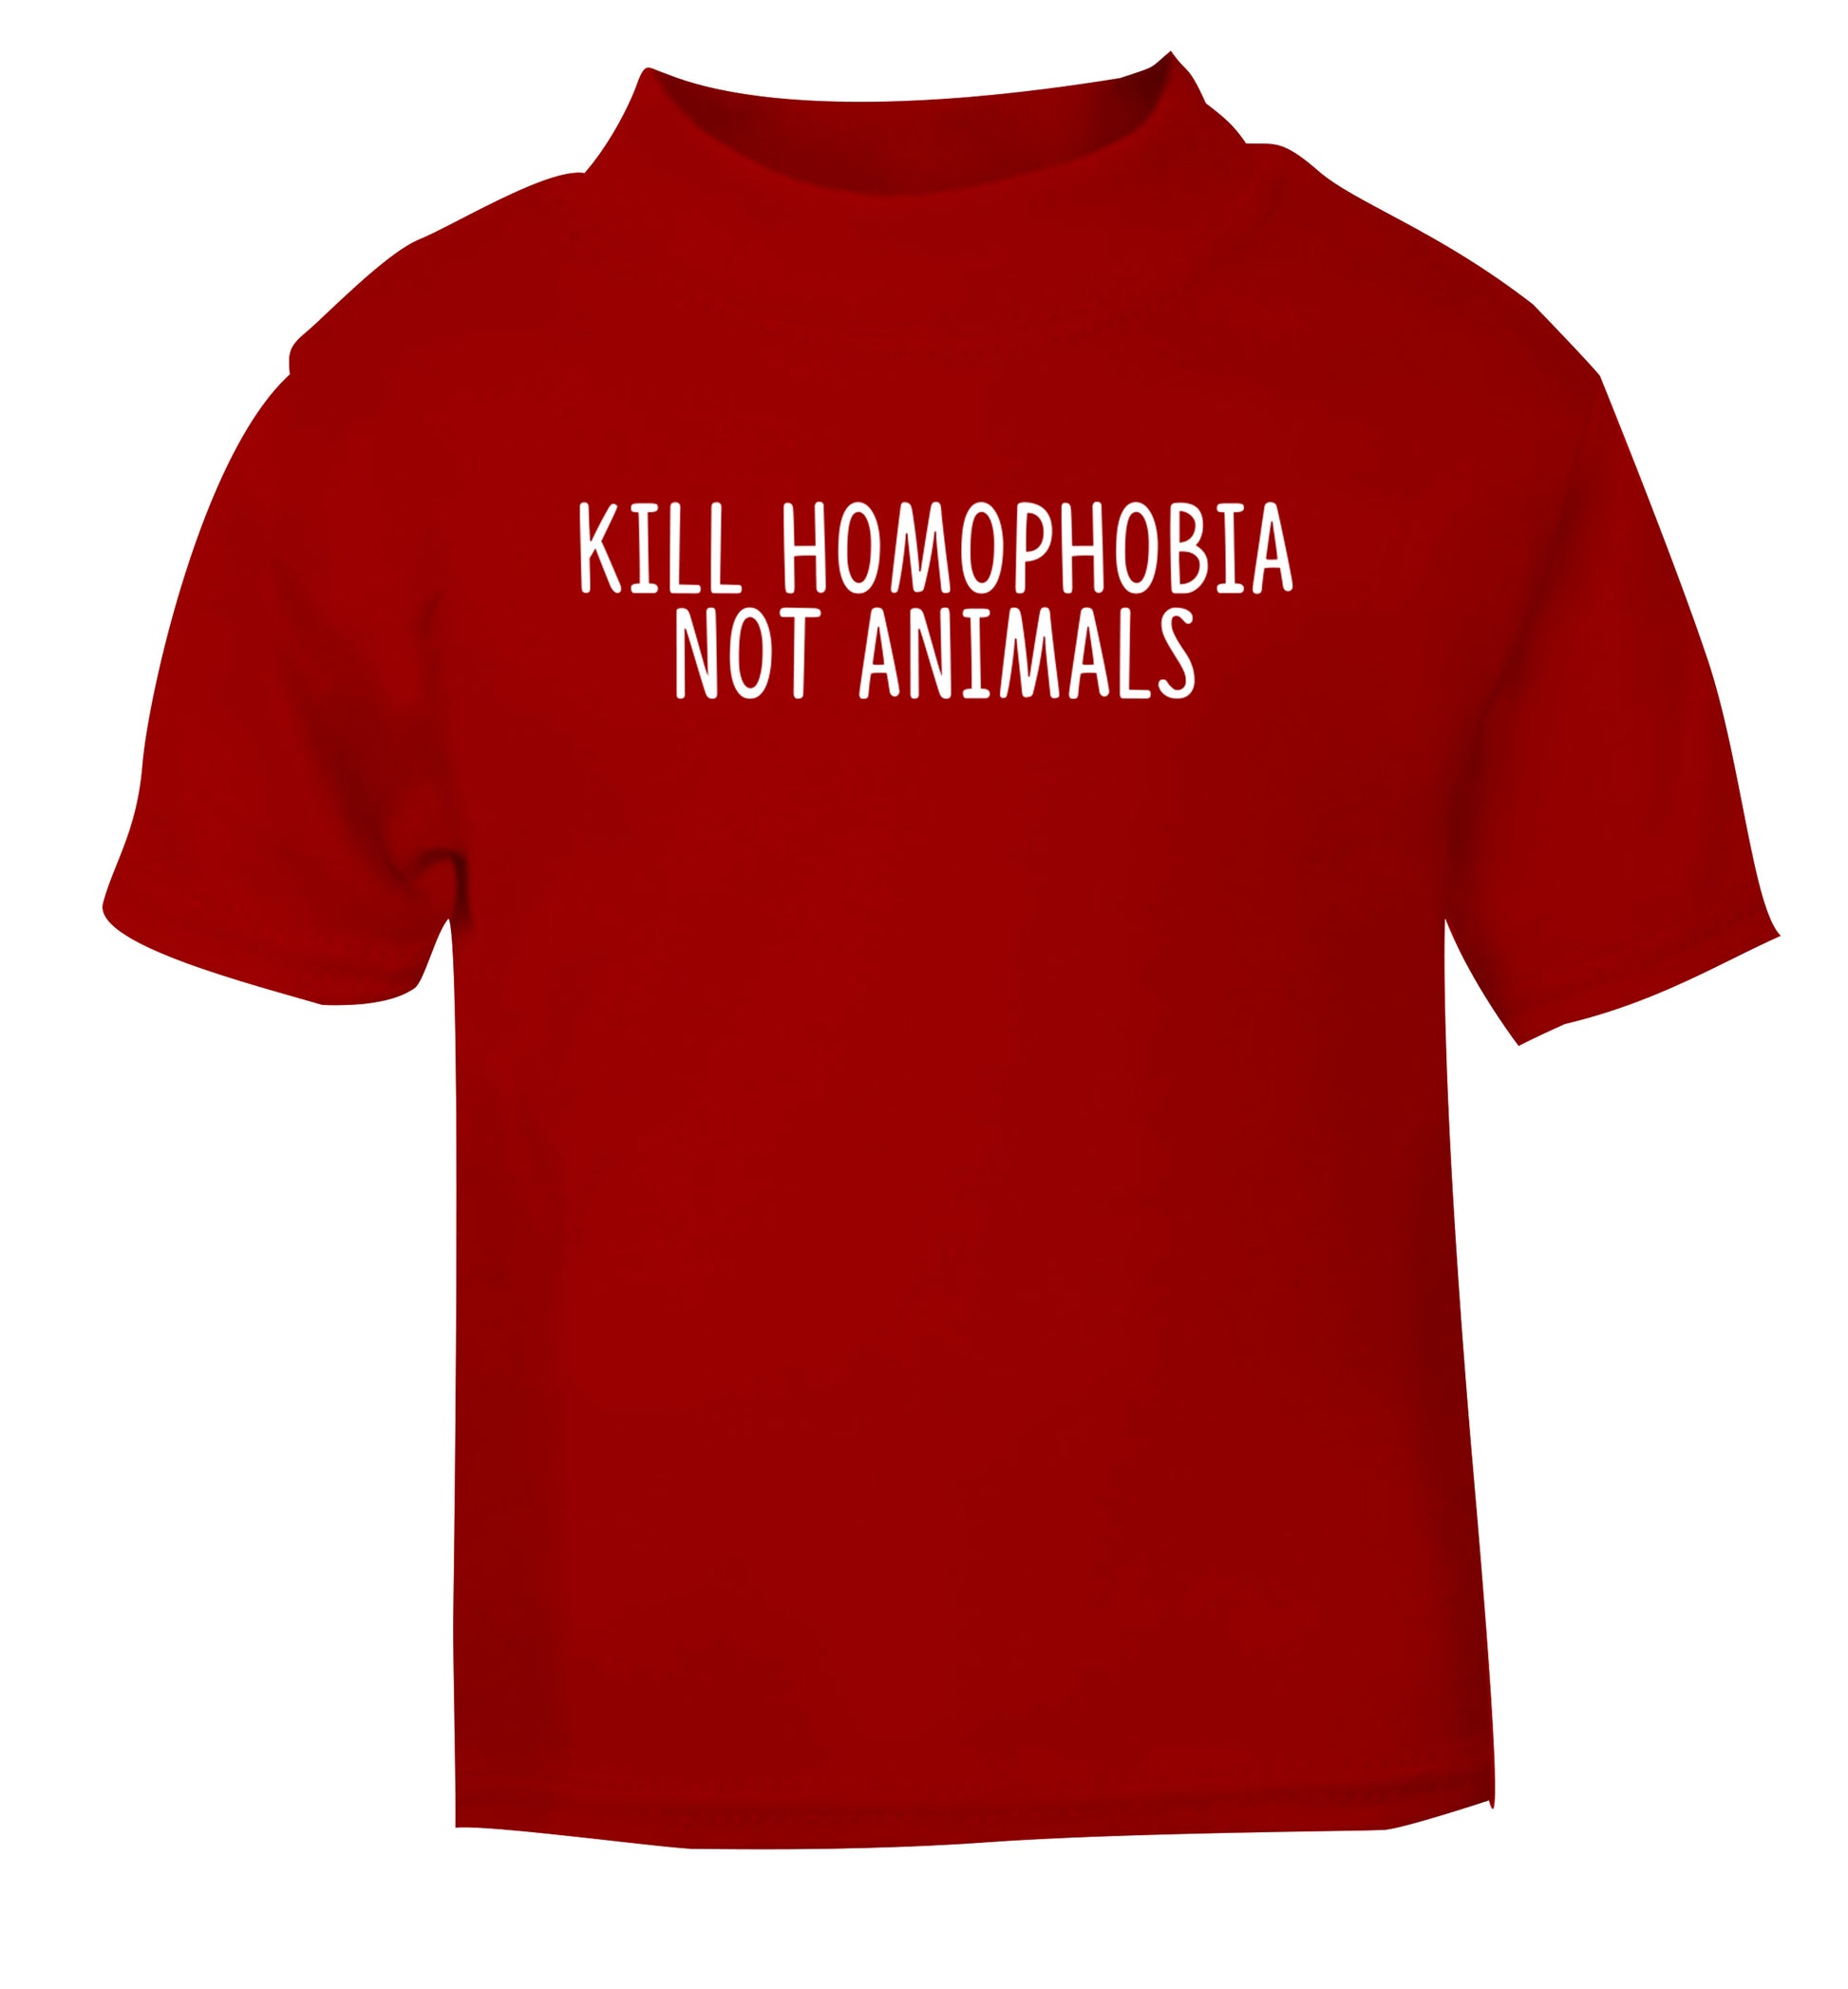 Kill Homophobia Not Animals red Baby Toddler Tshirt 2 Years